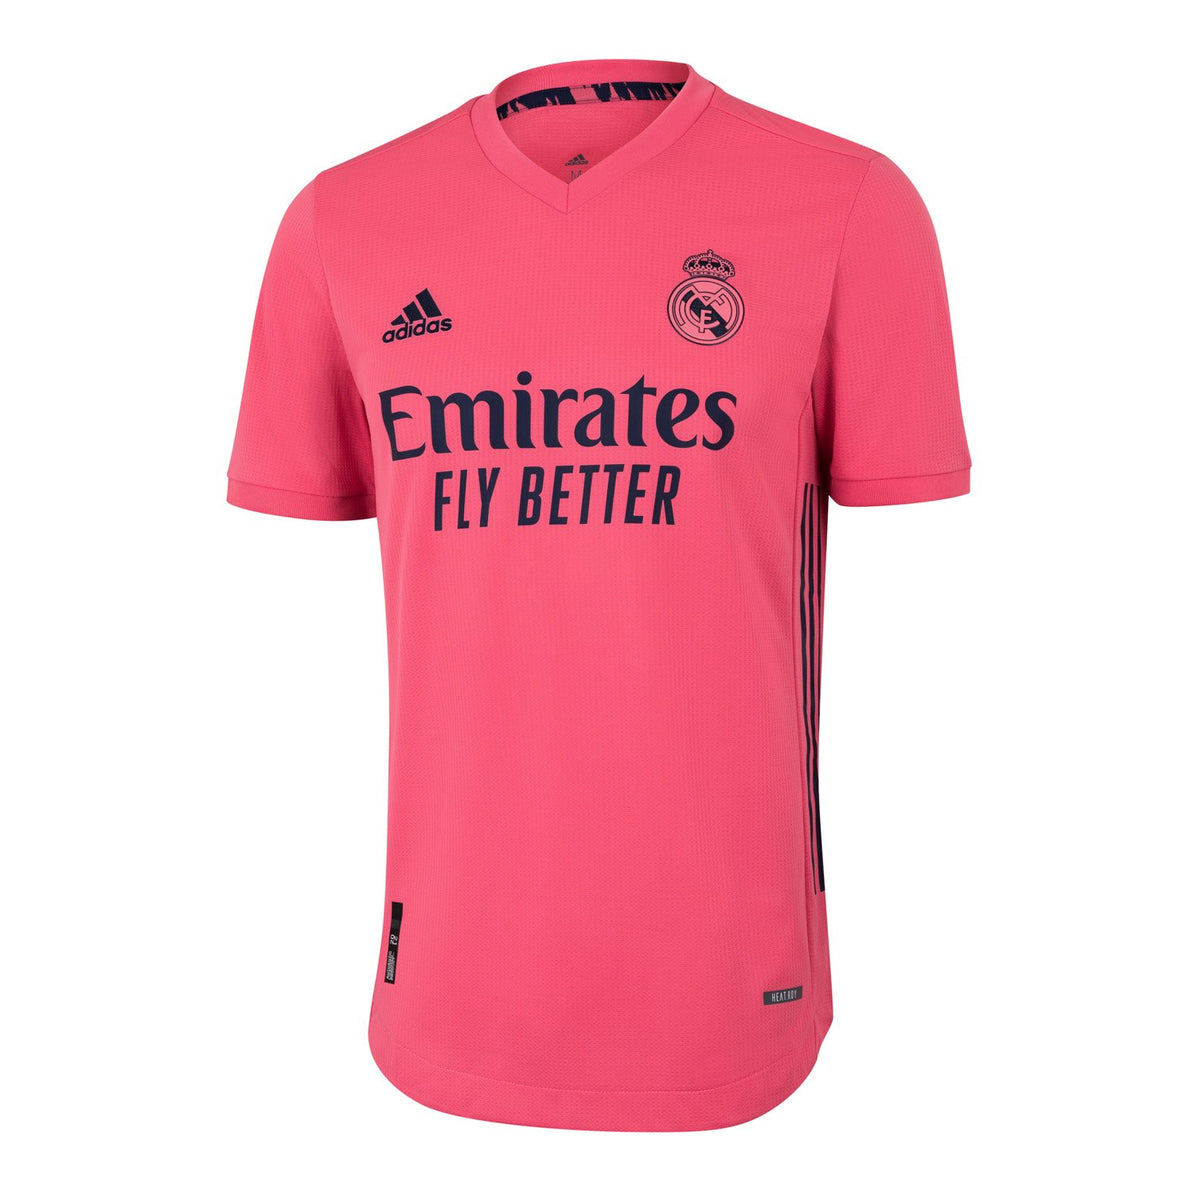 buy real madrid jersey